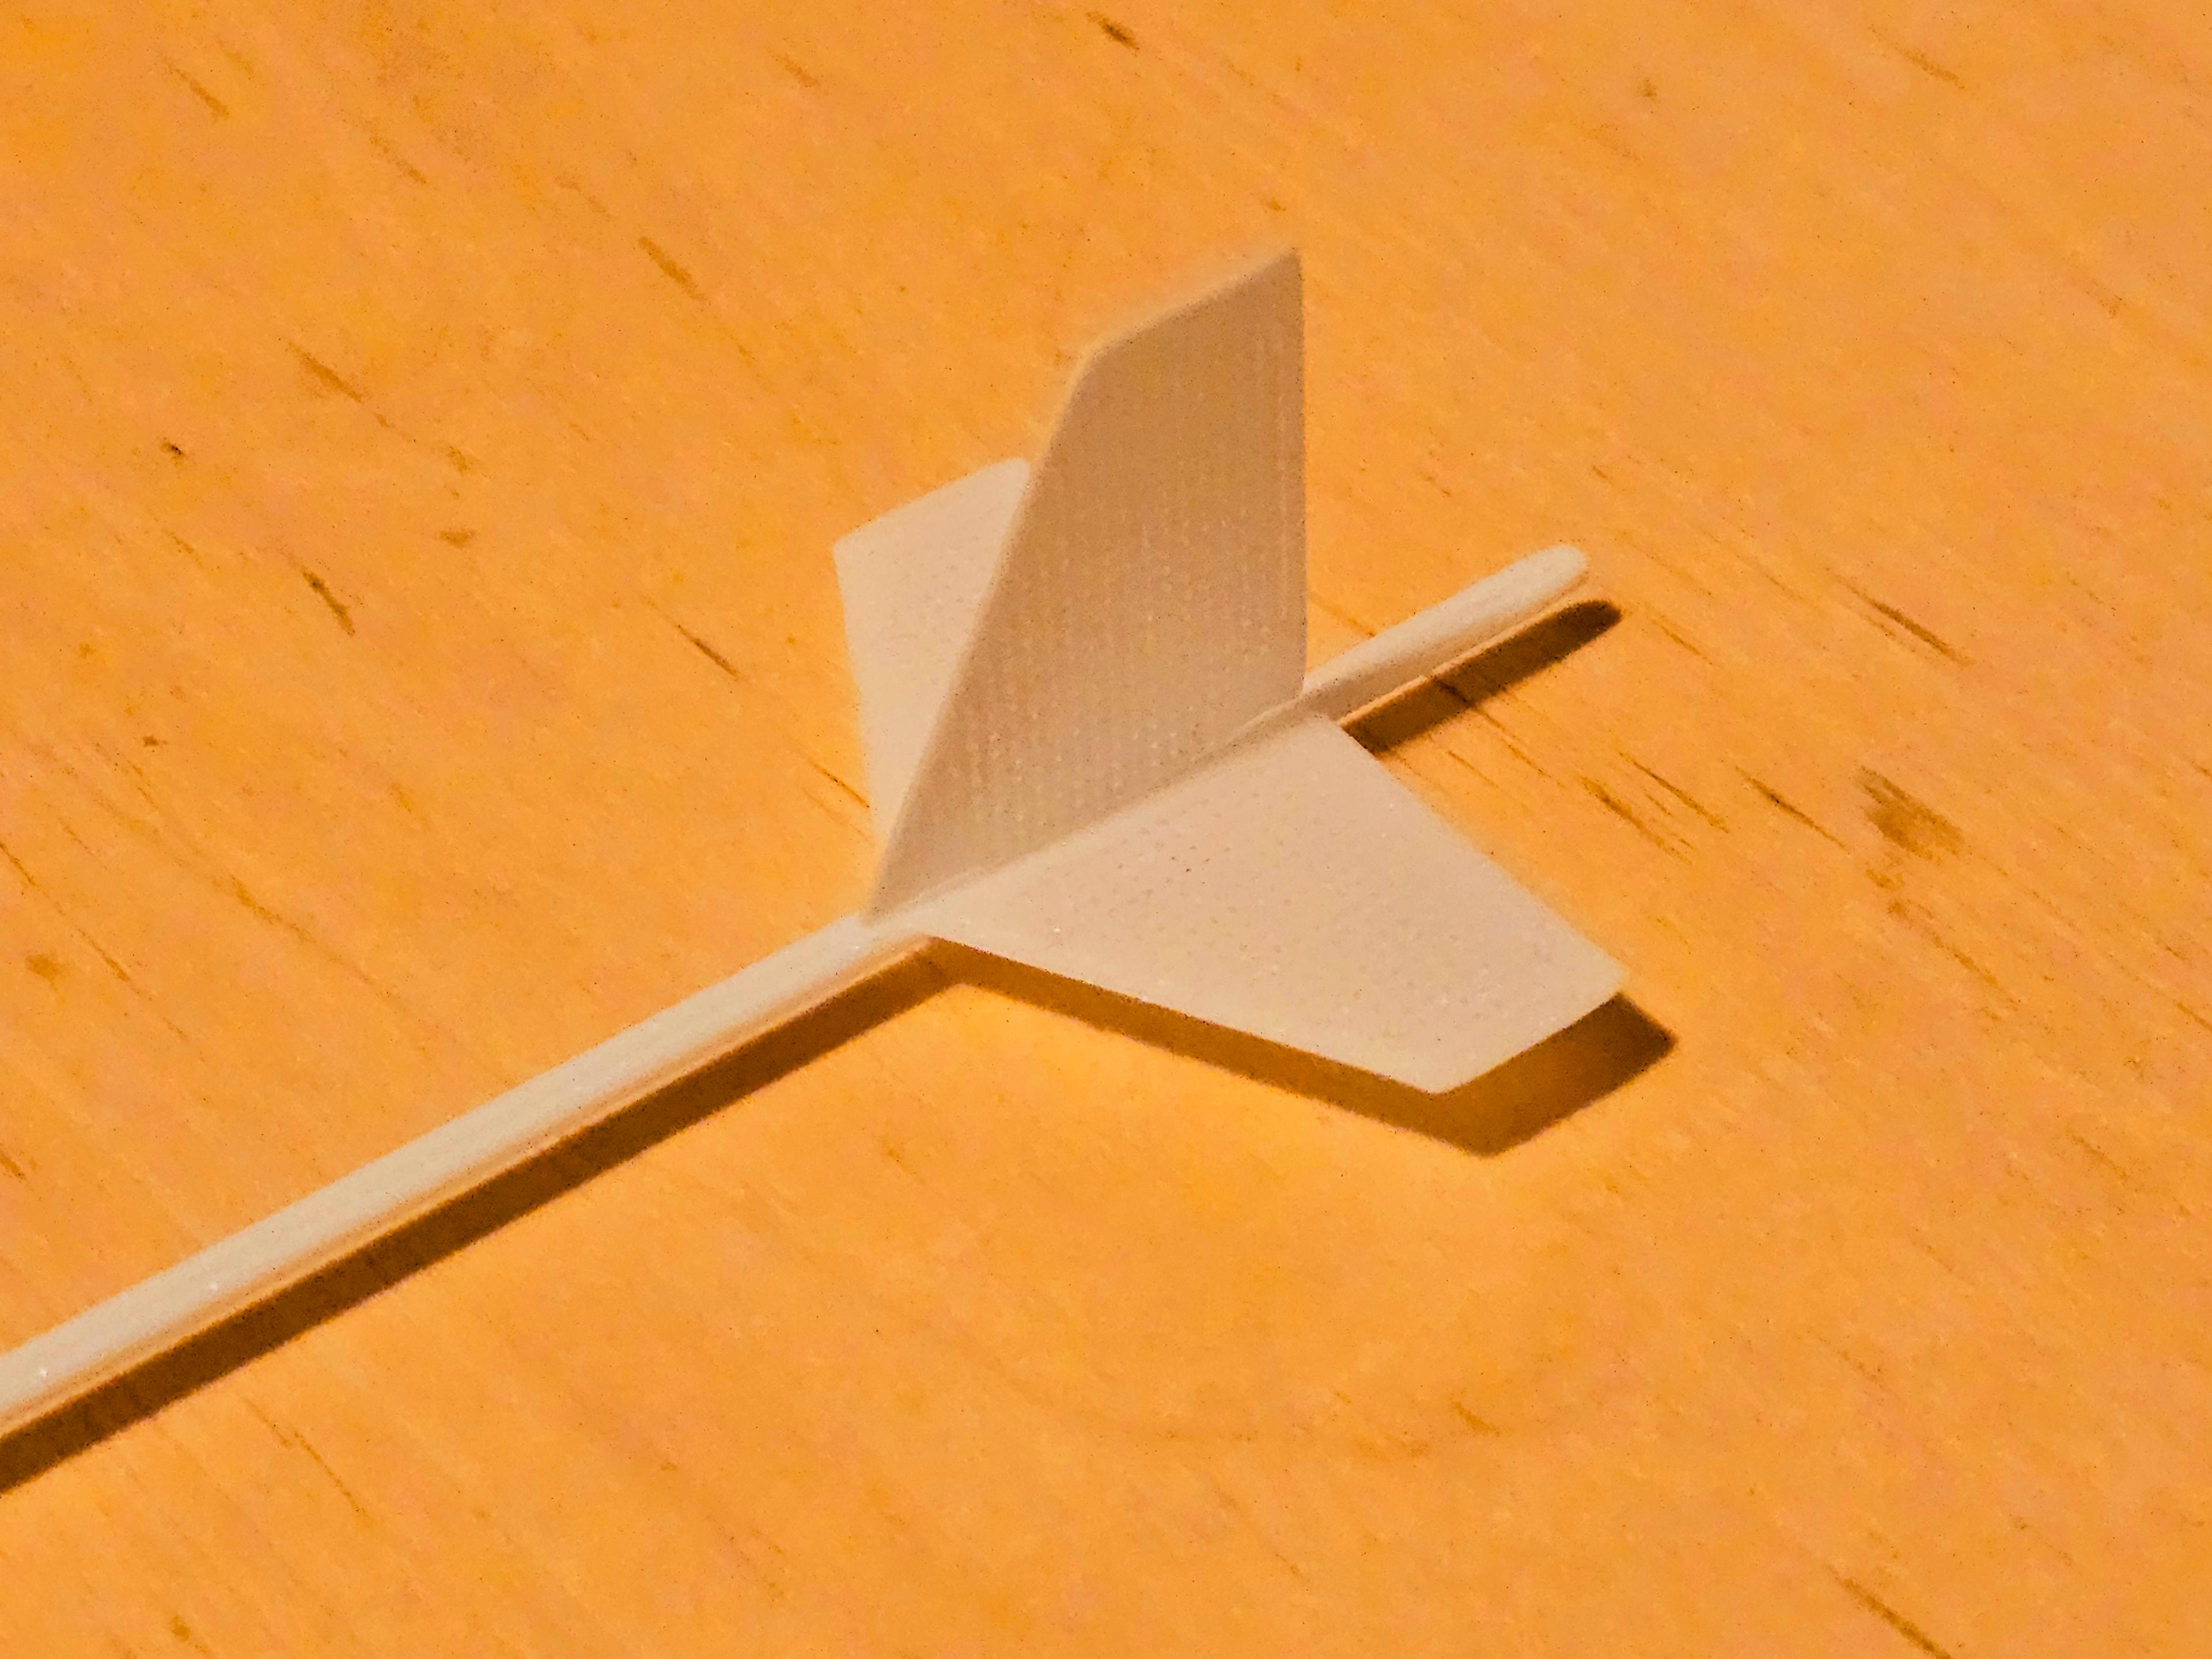 Slope Glider for Hand and Rubber Band Start 3d model